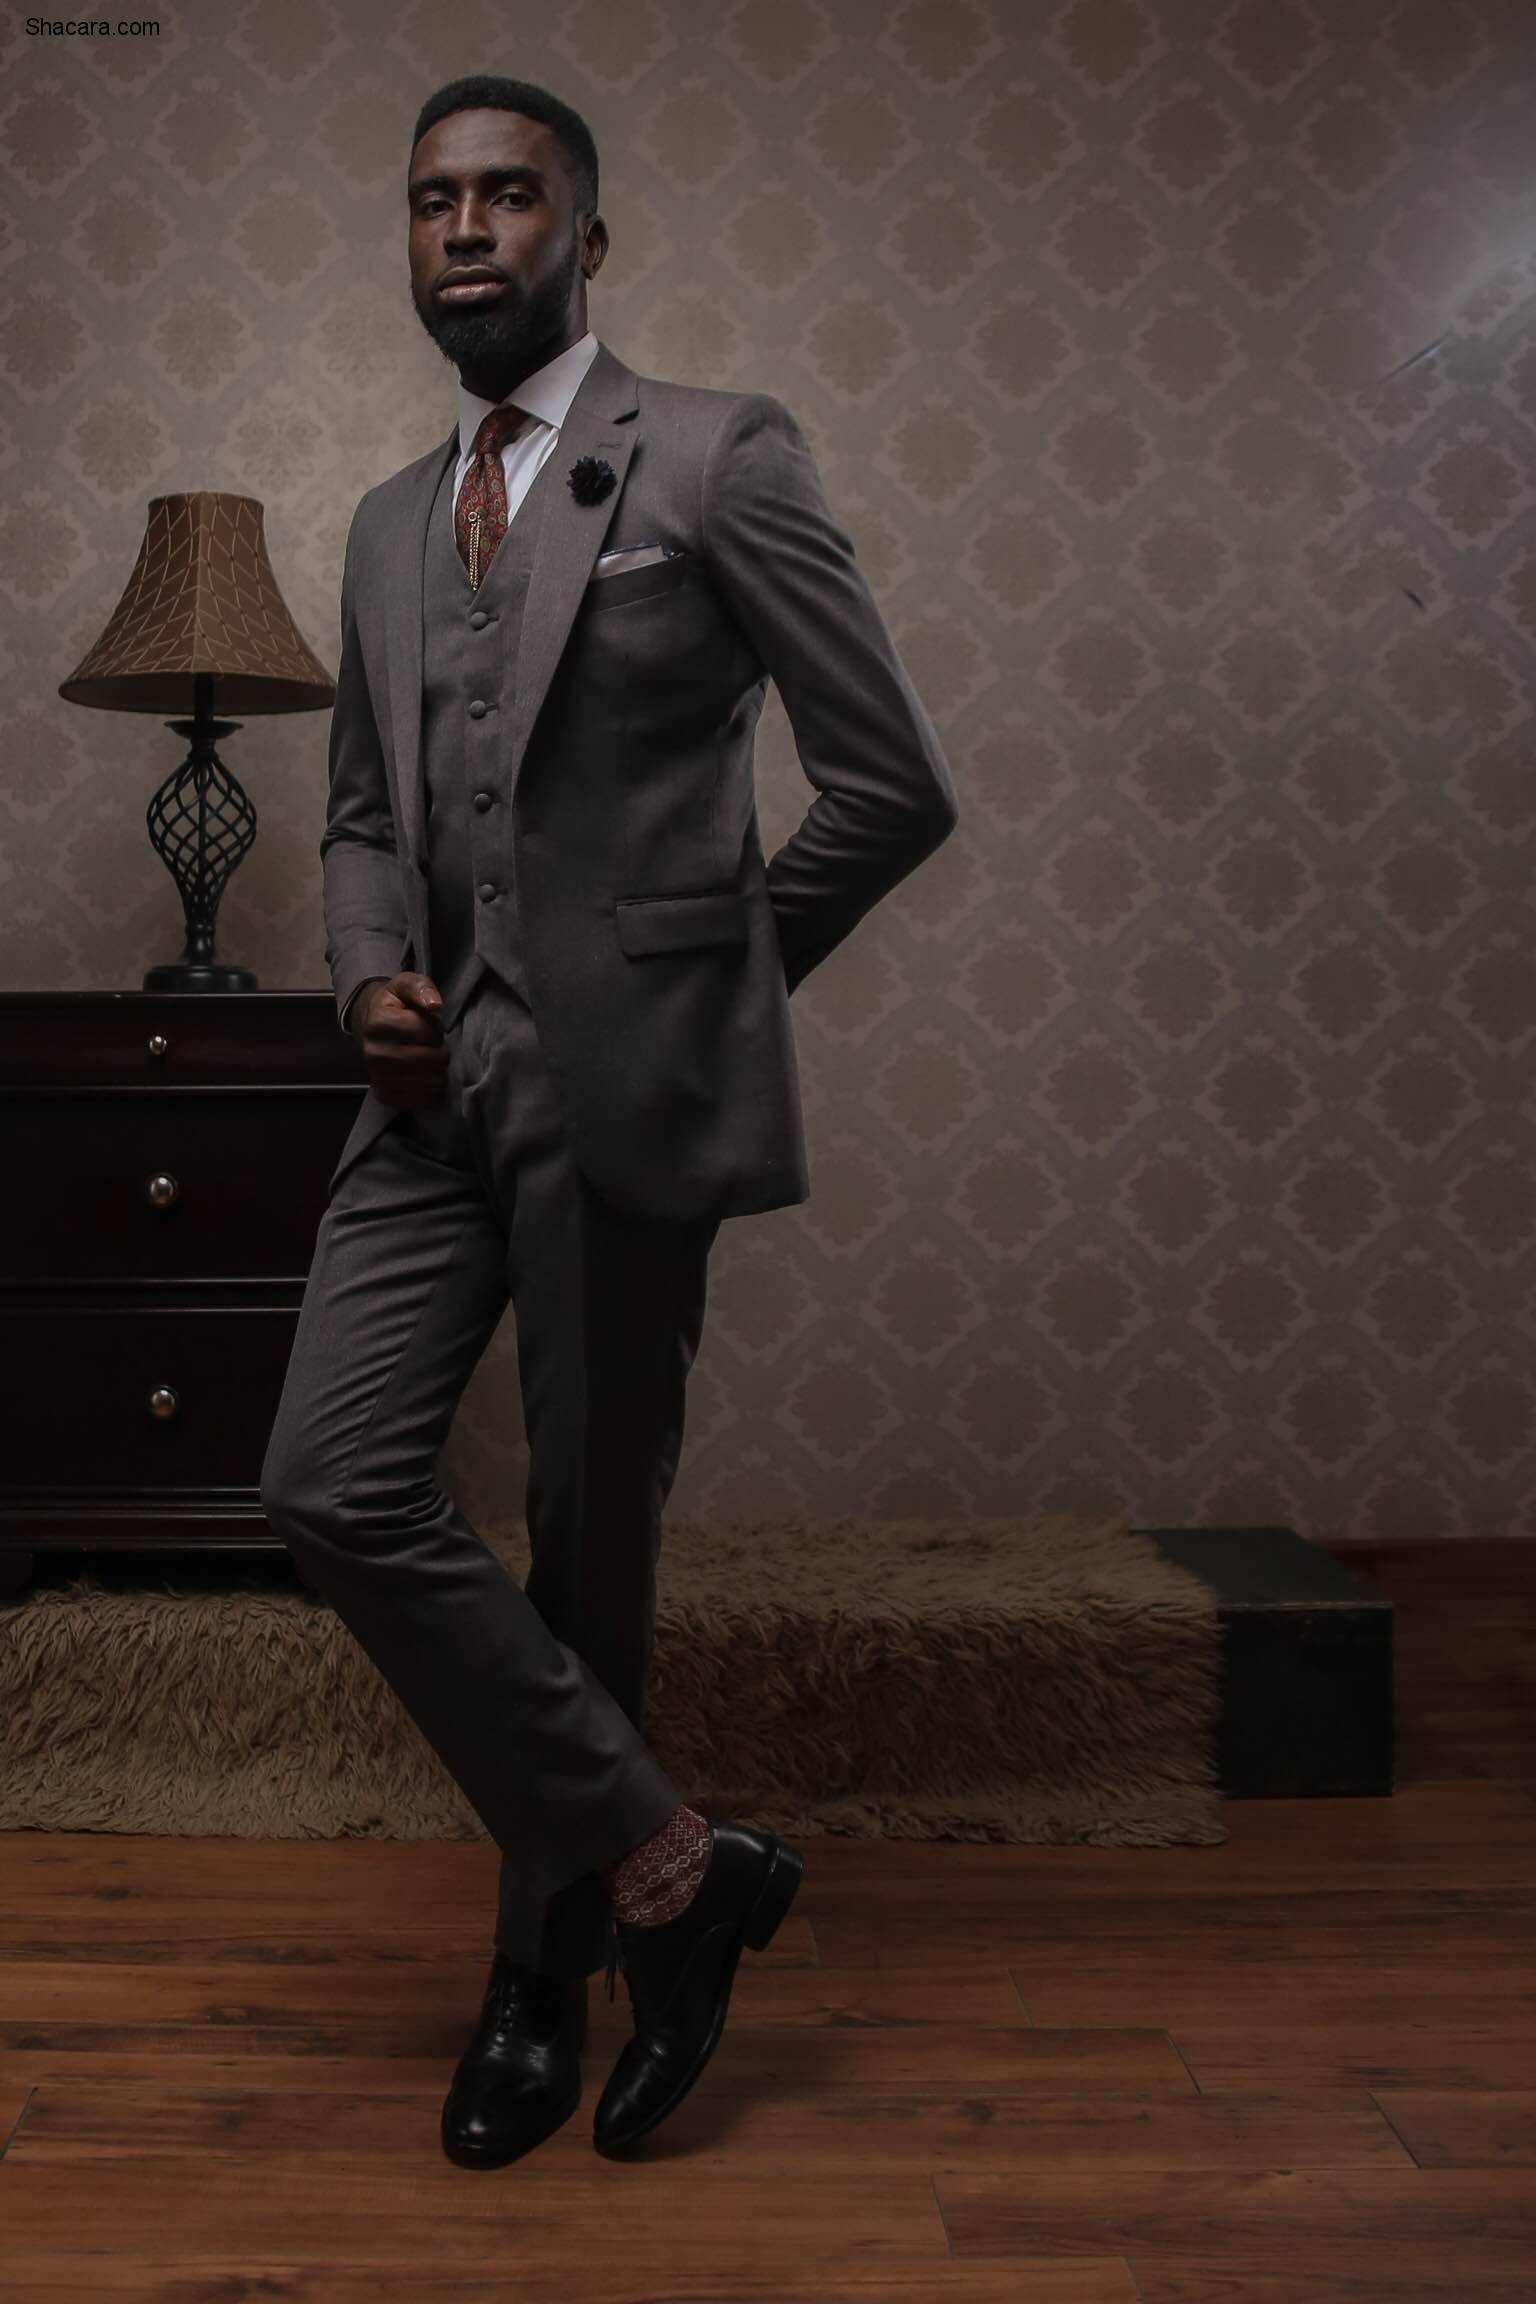 Nigeria’s Reves Presents ‘A Man’s Diary’ 2016 Collection; A Classic Suit Style Collection